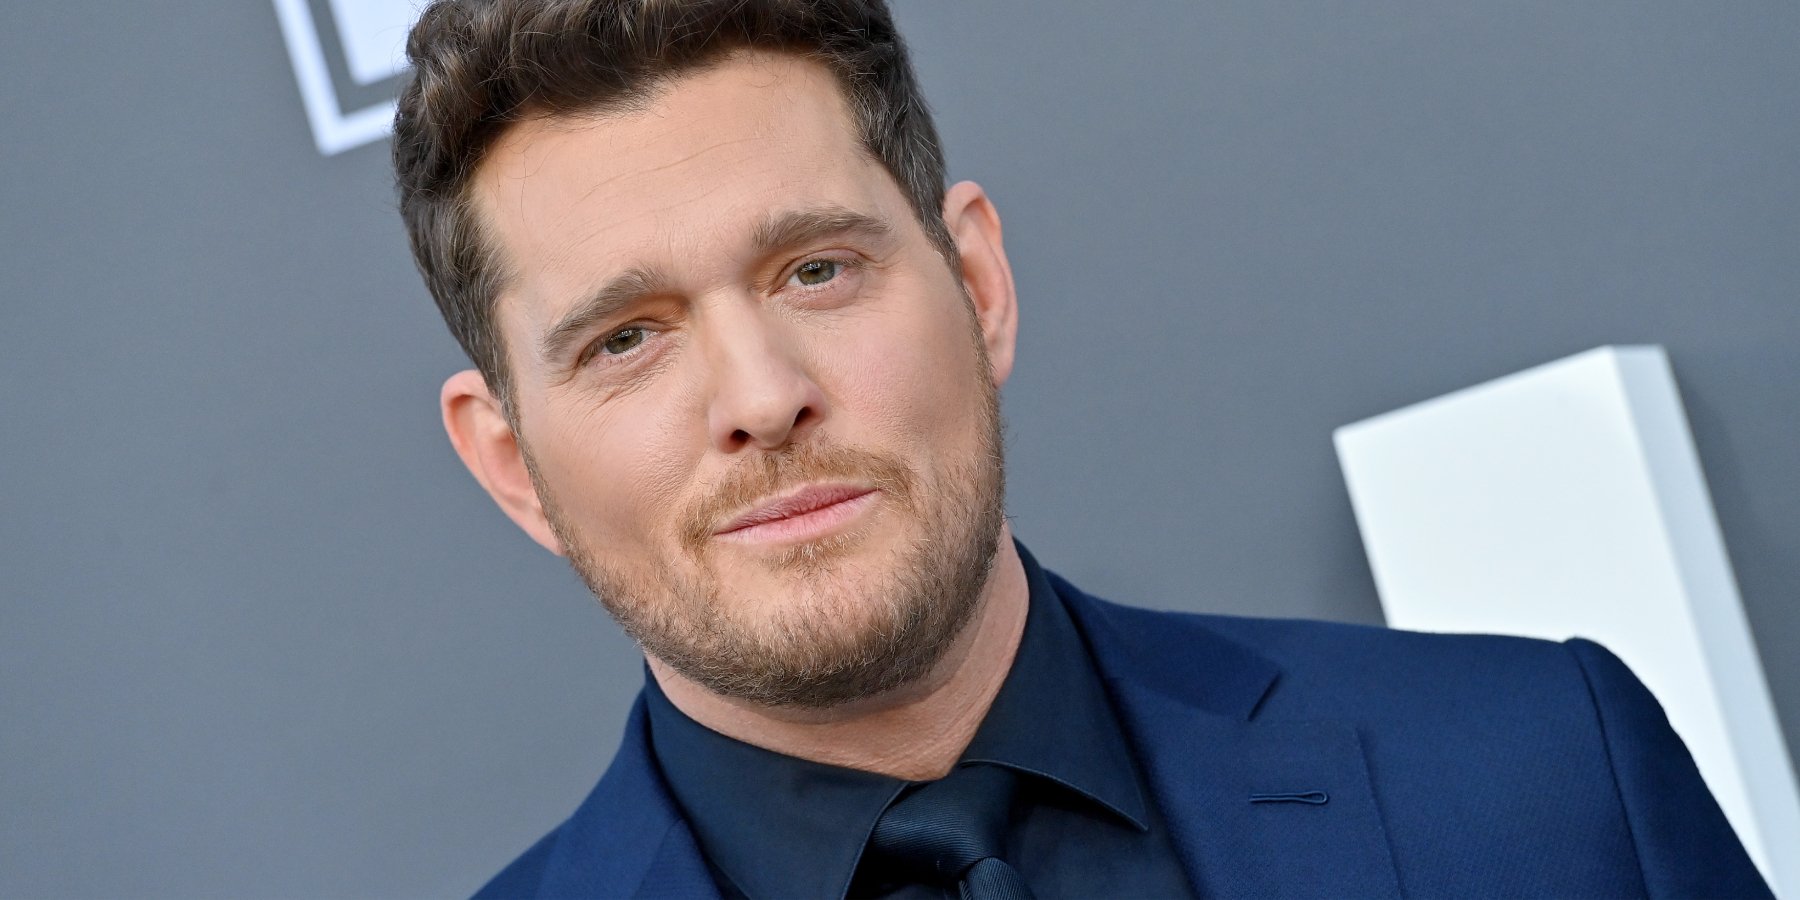 ‘Dancing with the Stars’ Fans Voice More Complaints Ahead of Michael Buble’s Ballroom Appearance